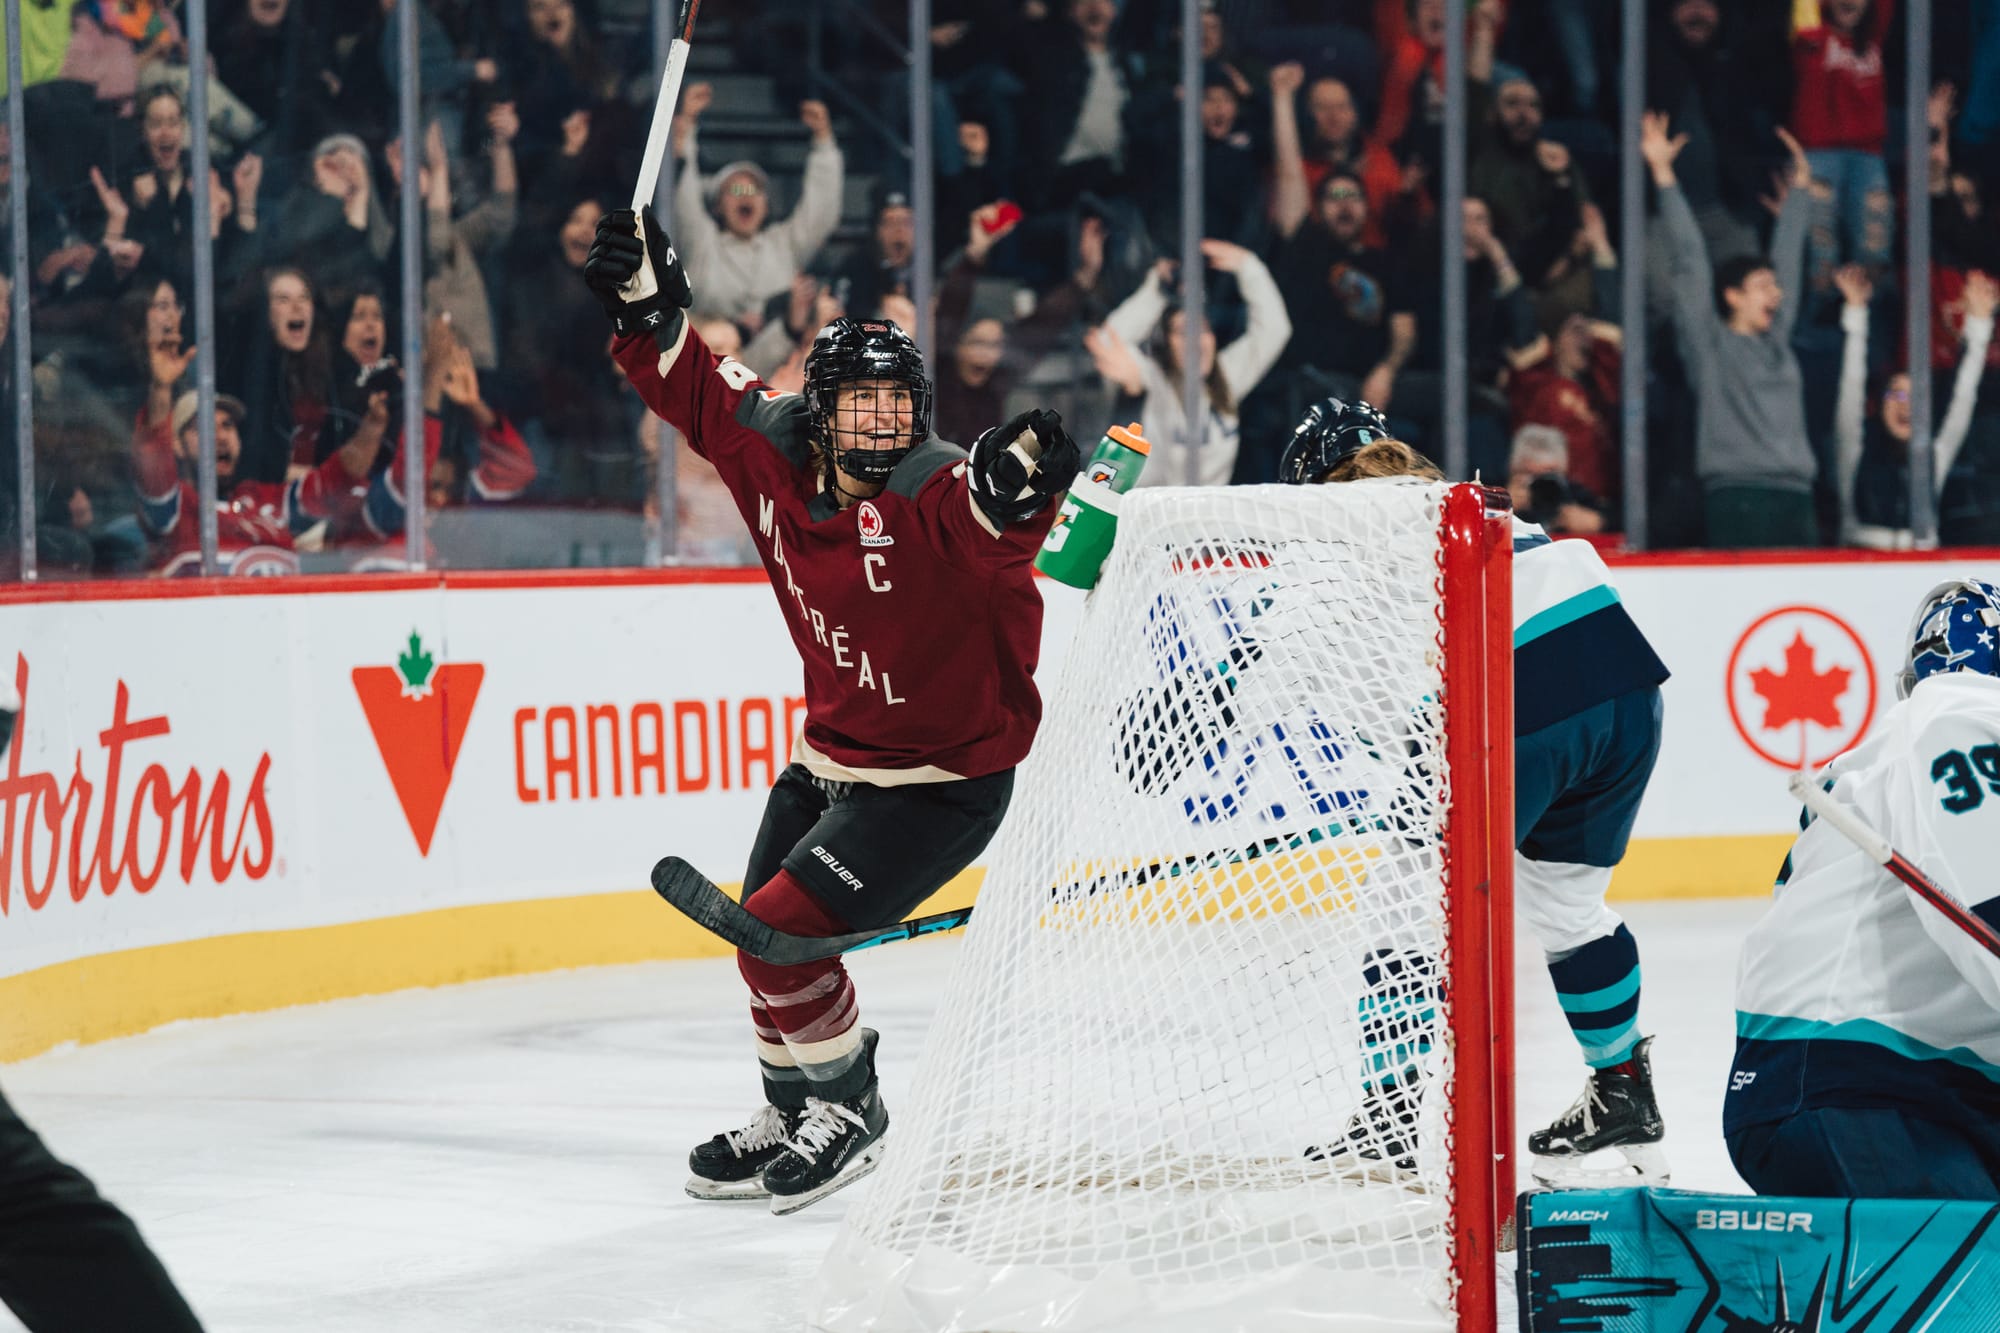 Marie-Philip Poulin, wearing her maroon home uniform, celebrates her goal against Toronto. 